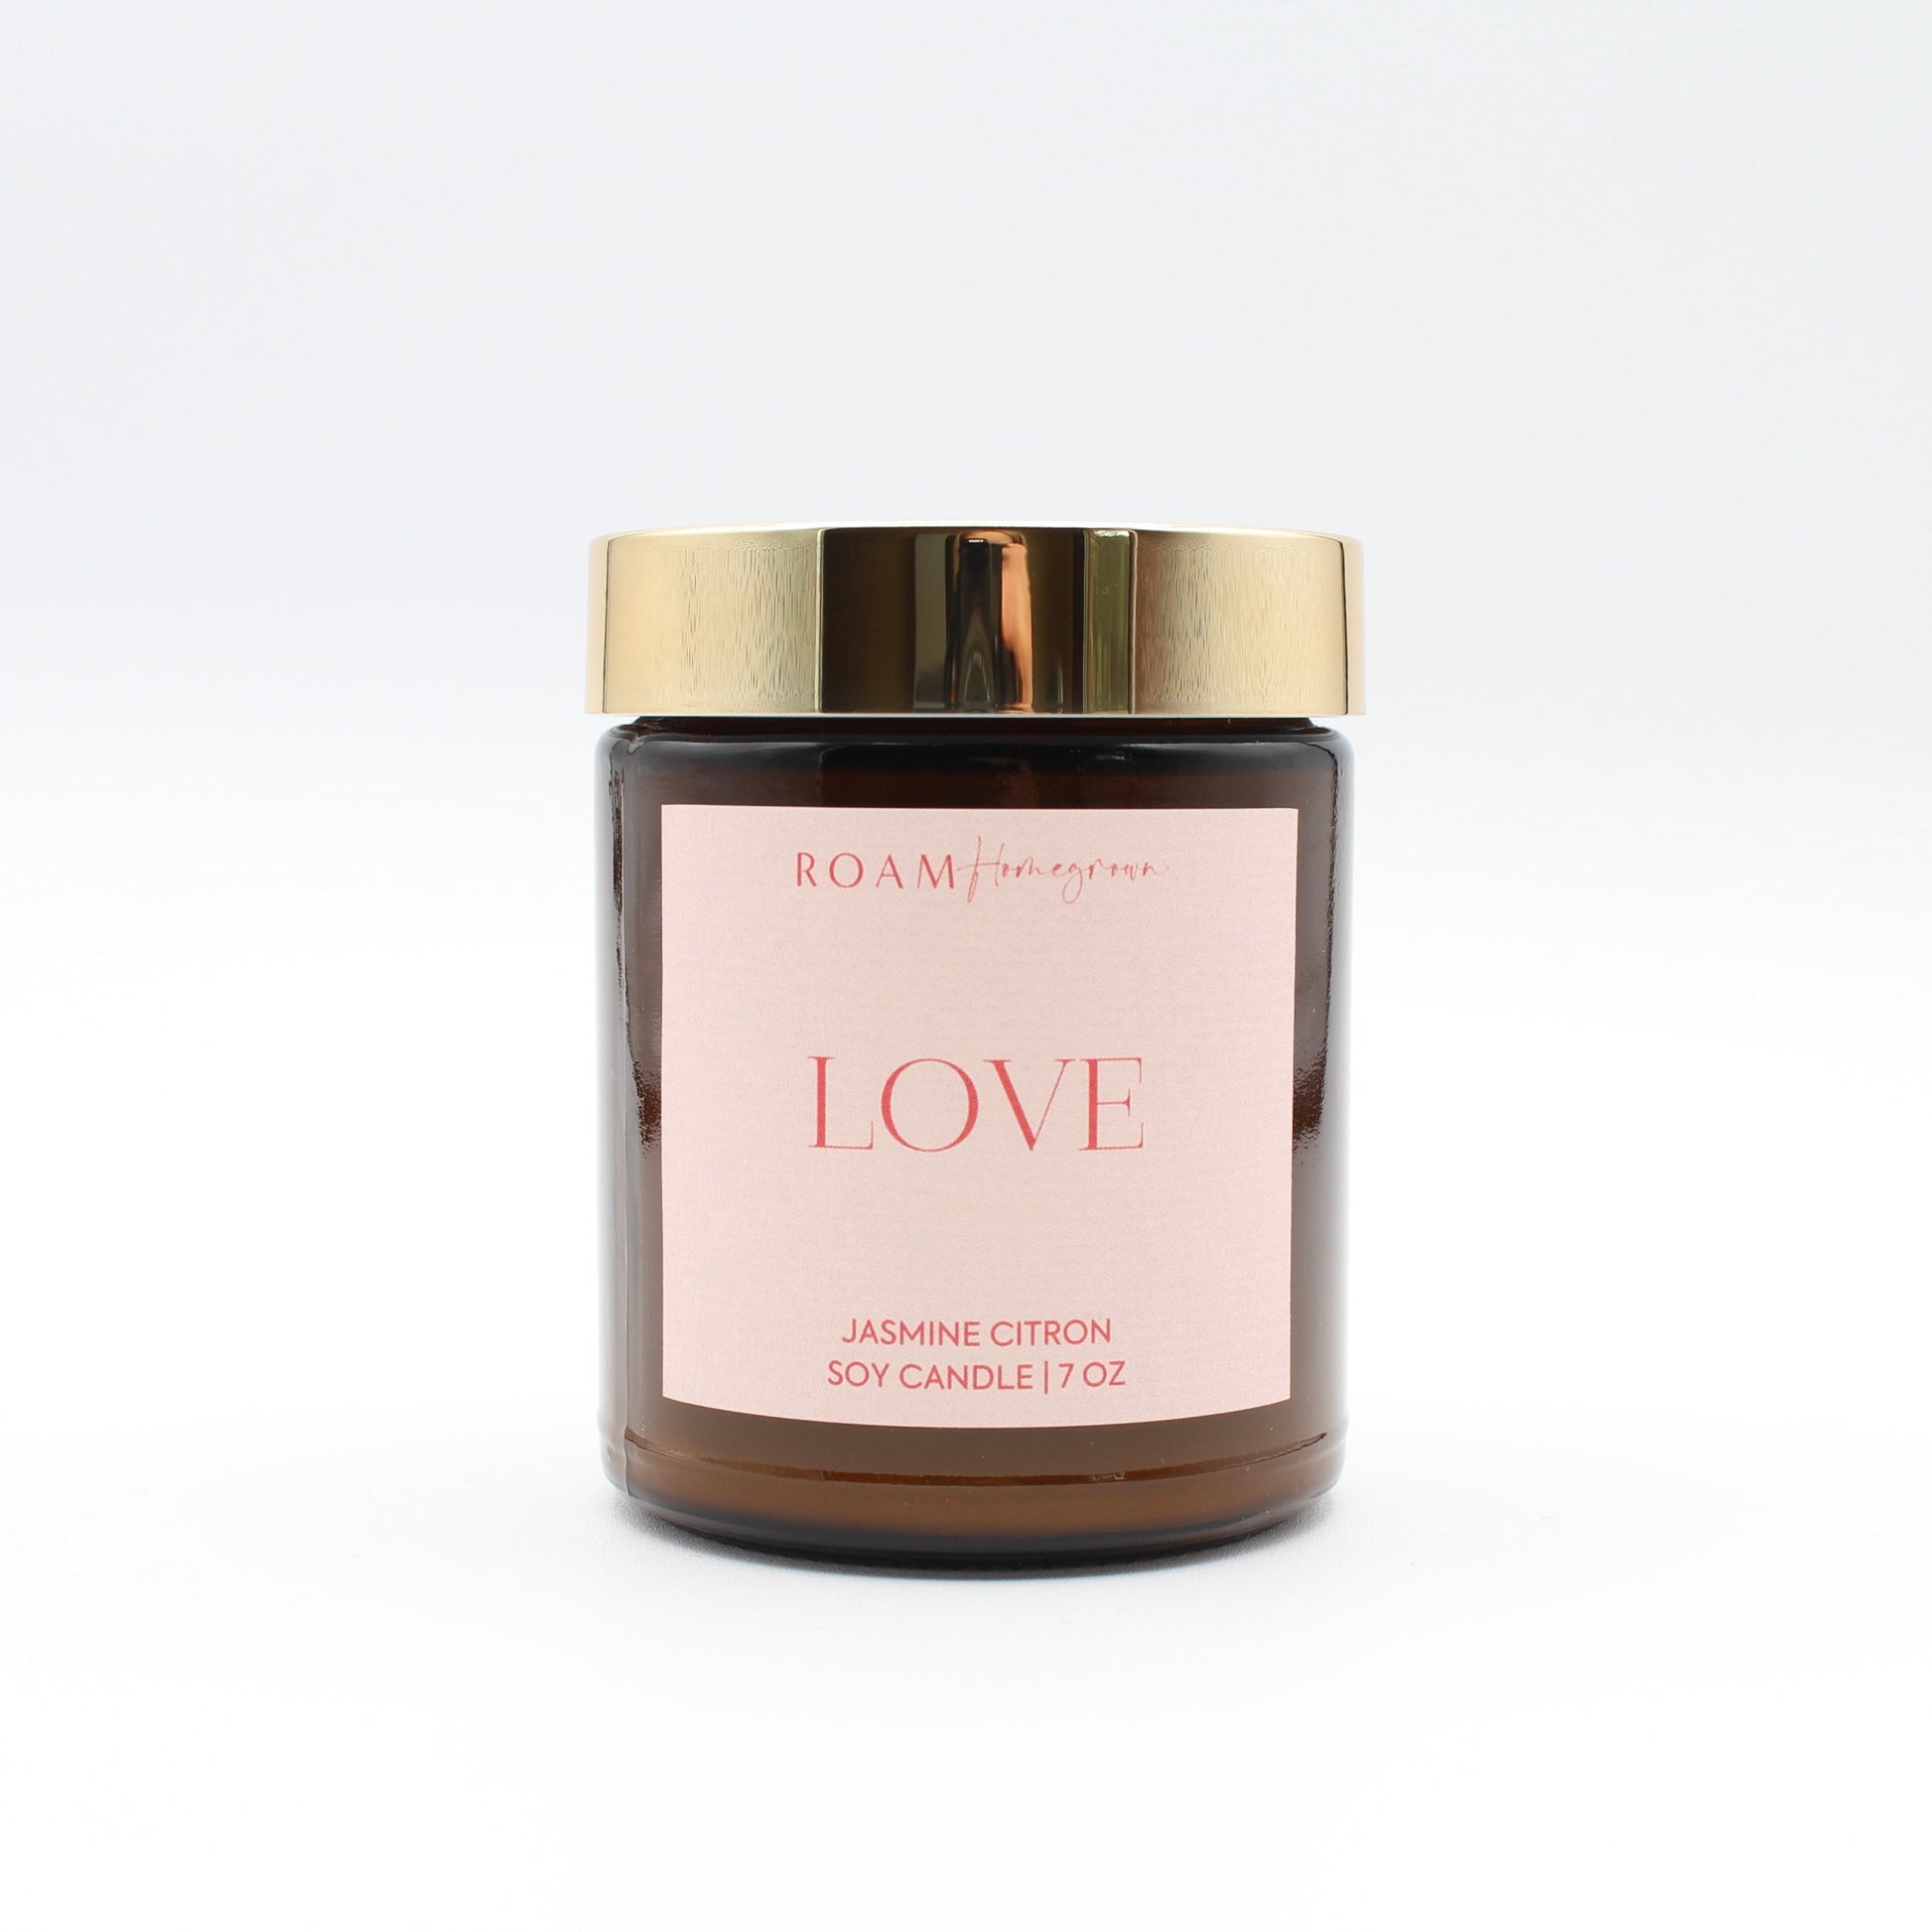 LOVE Valentine's Day Soy Candle, 7 oz - ROAM Homegrown